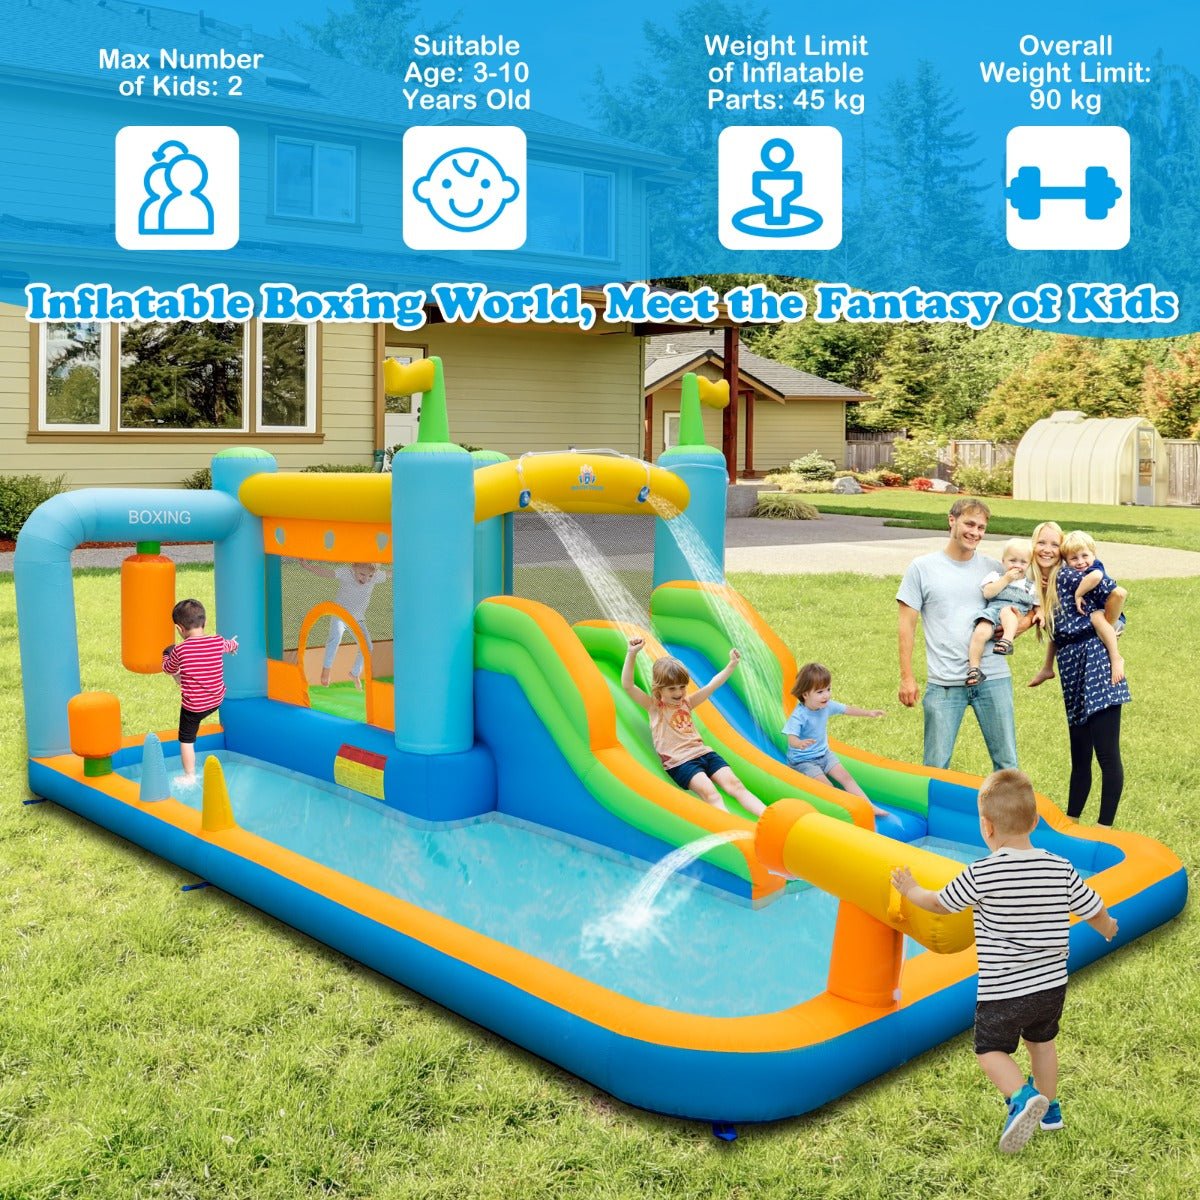 Shop Now for Inflatable Bounce House